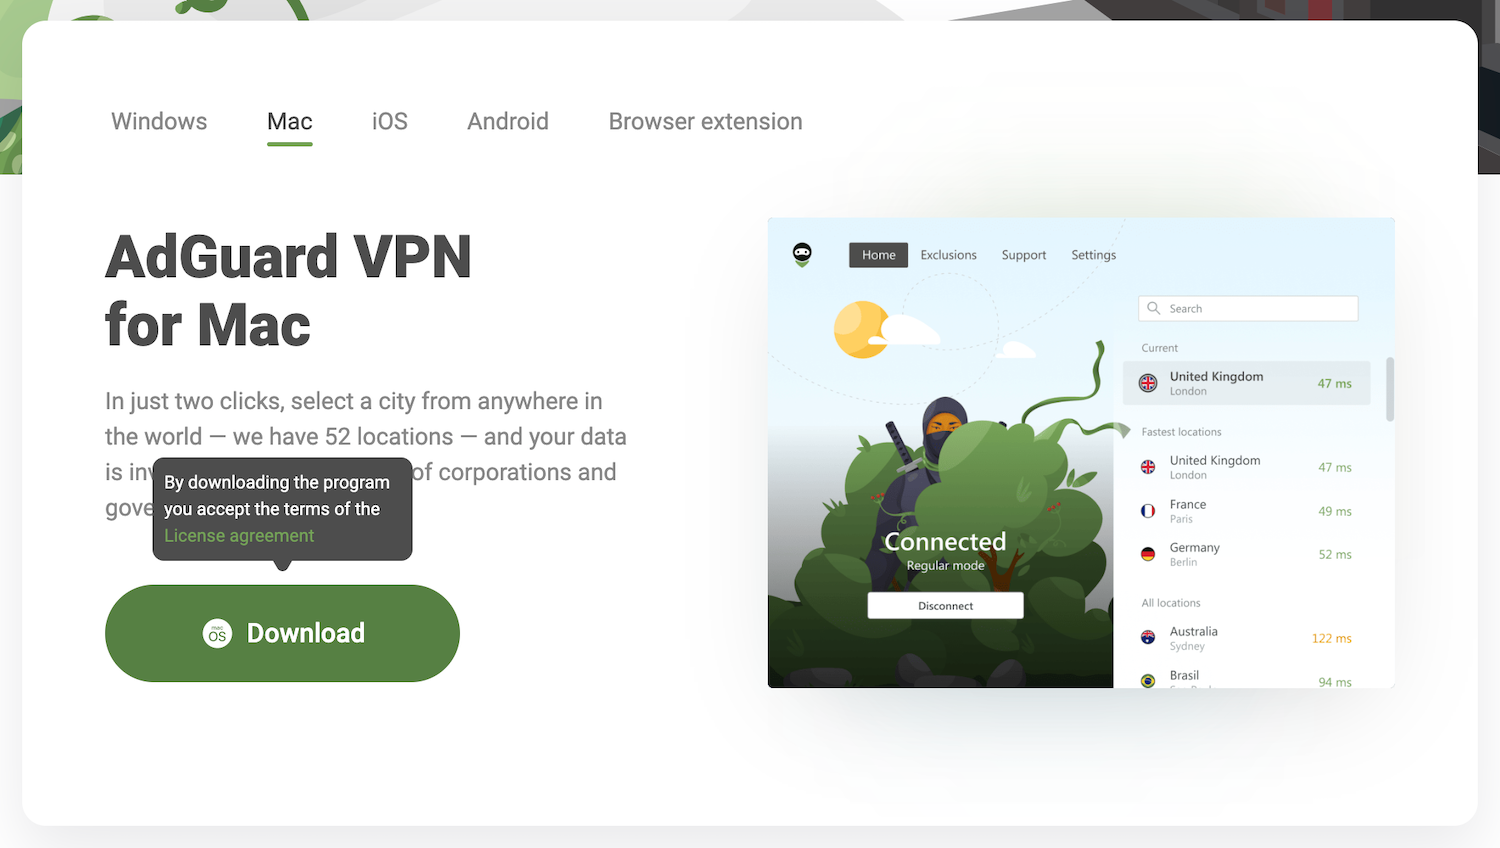 Download AdGuard VPN from the official website